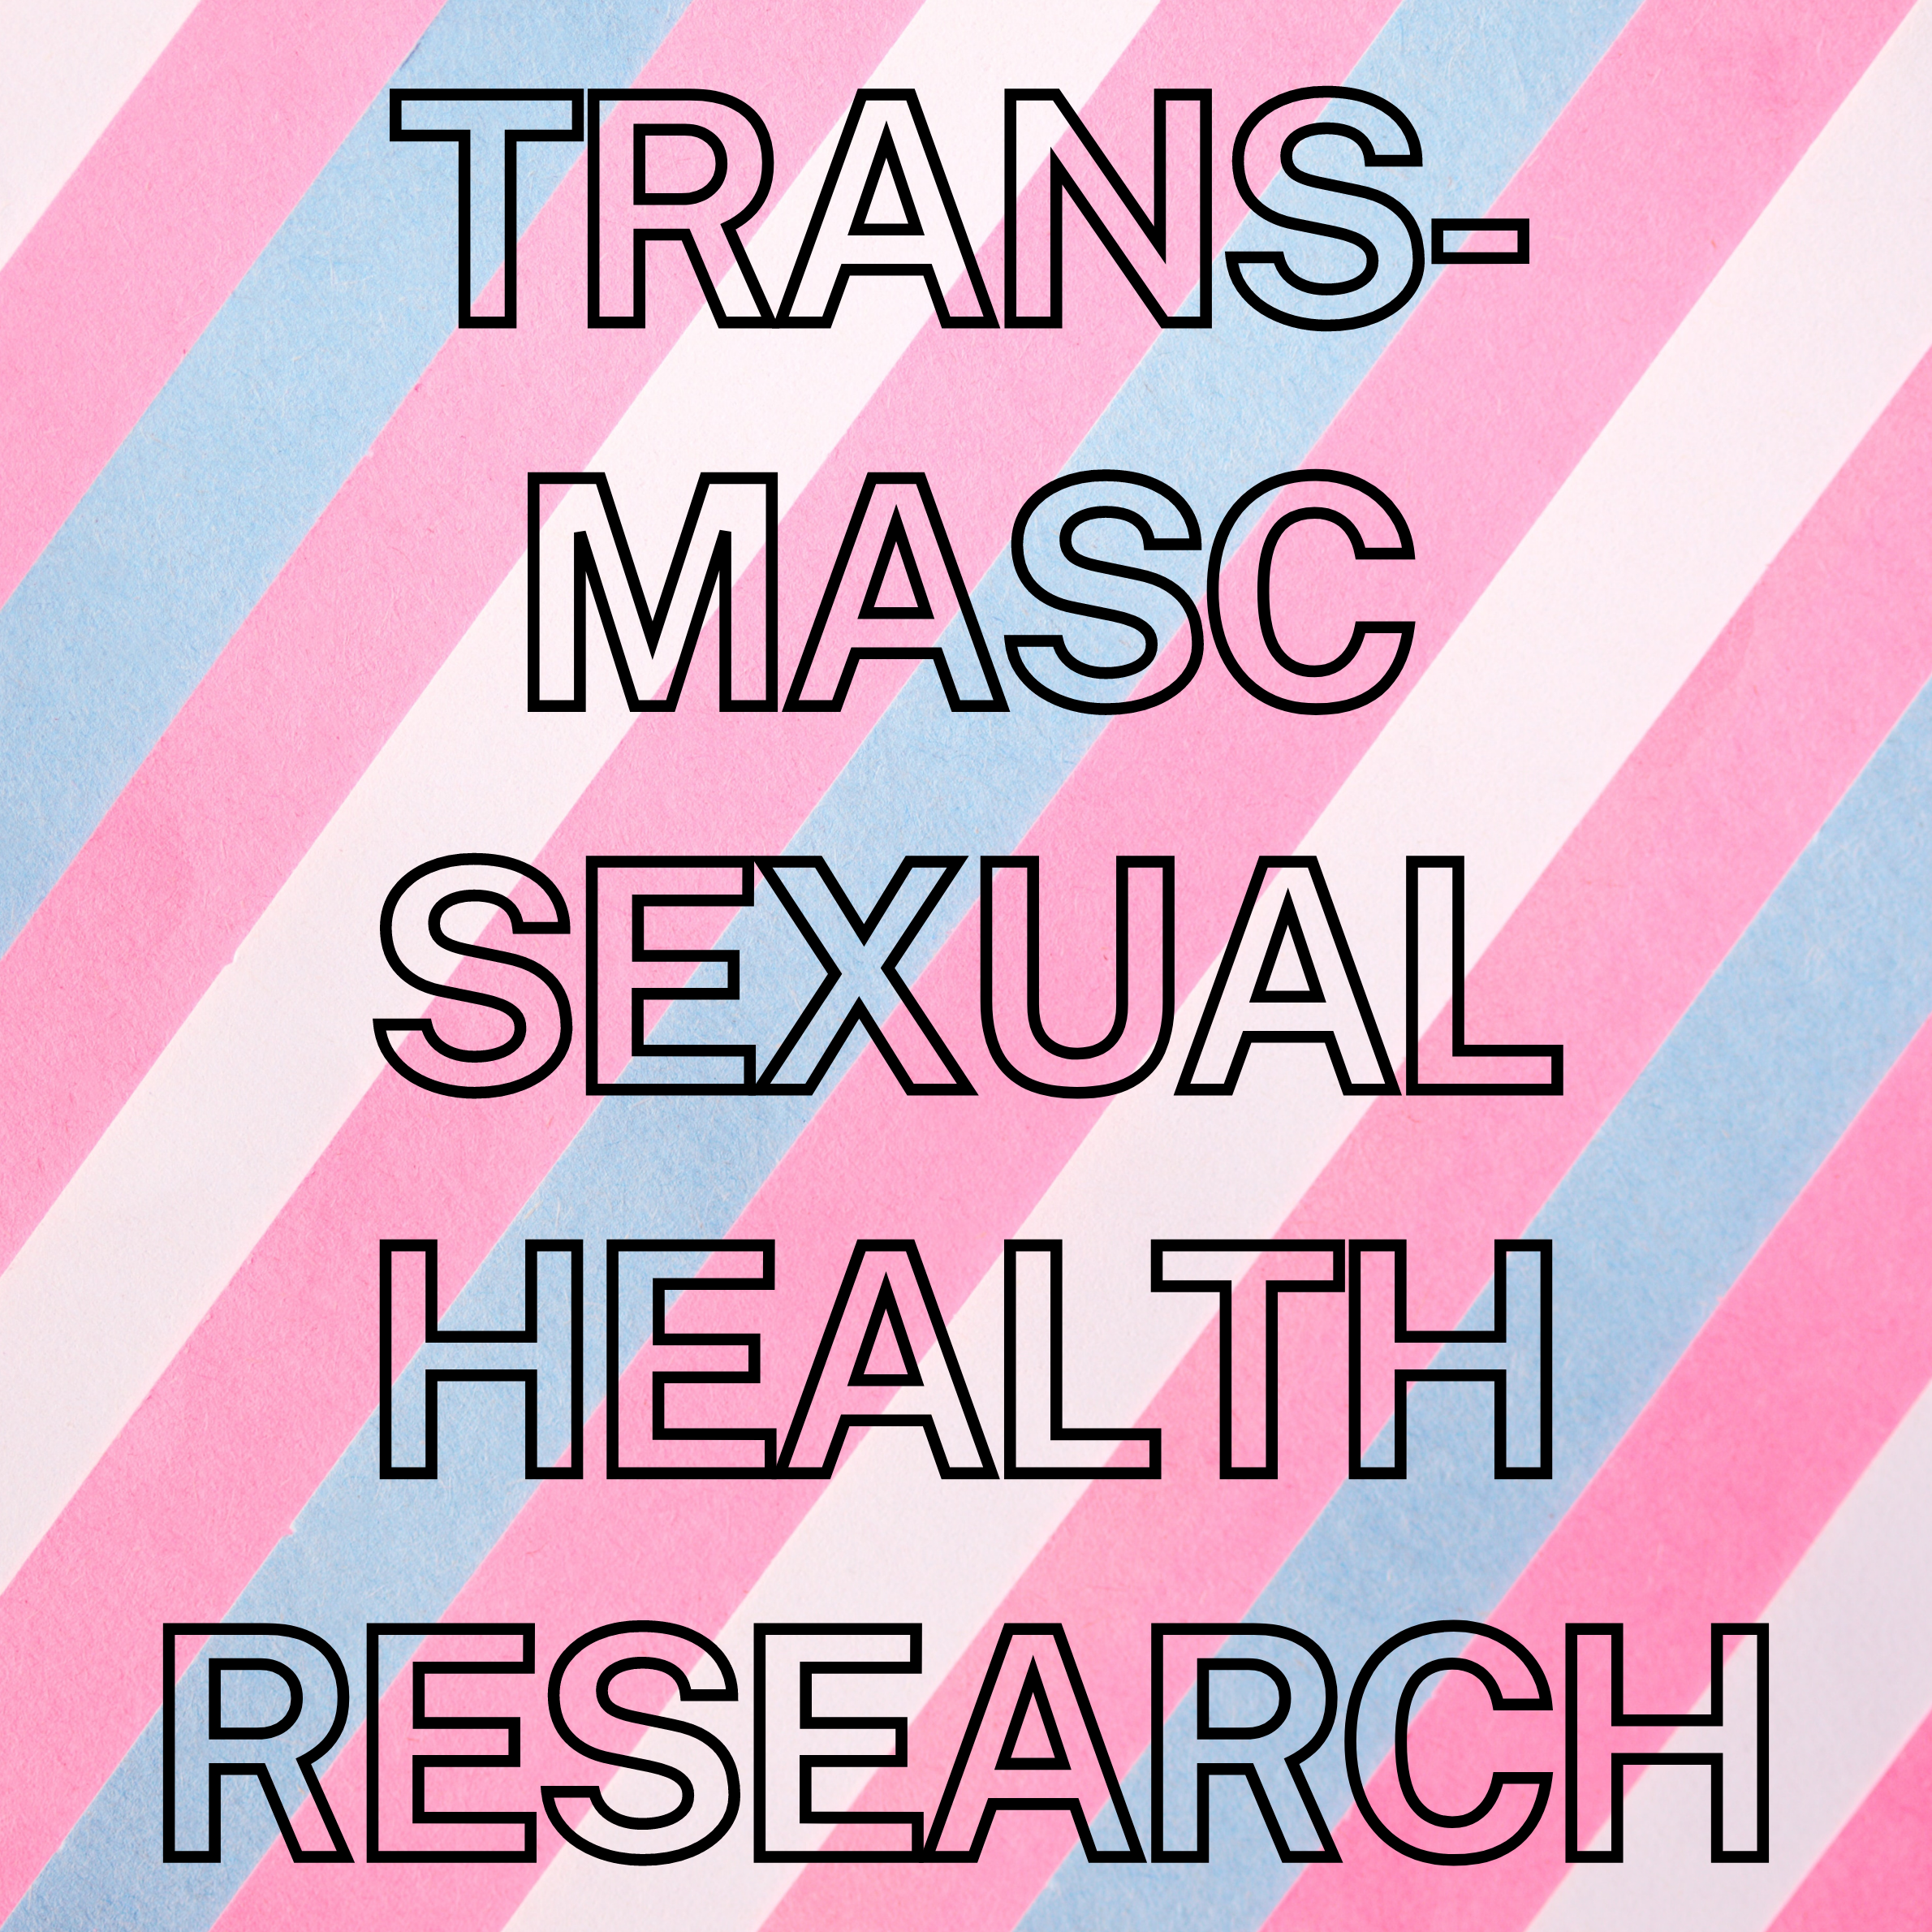 Investigating sexual healthcare for trans men and transmasculine people in Australia